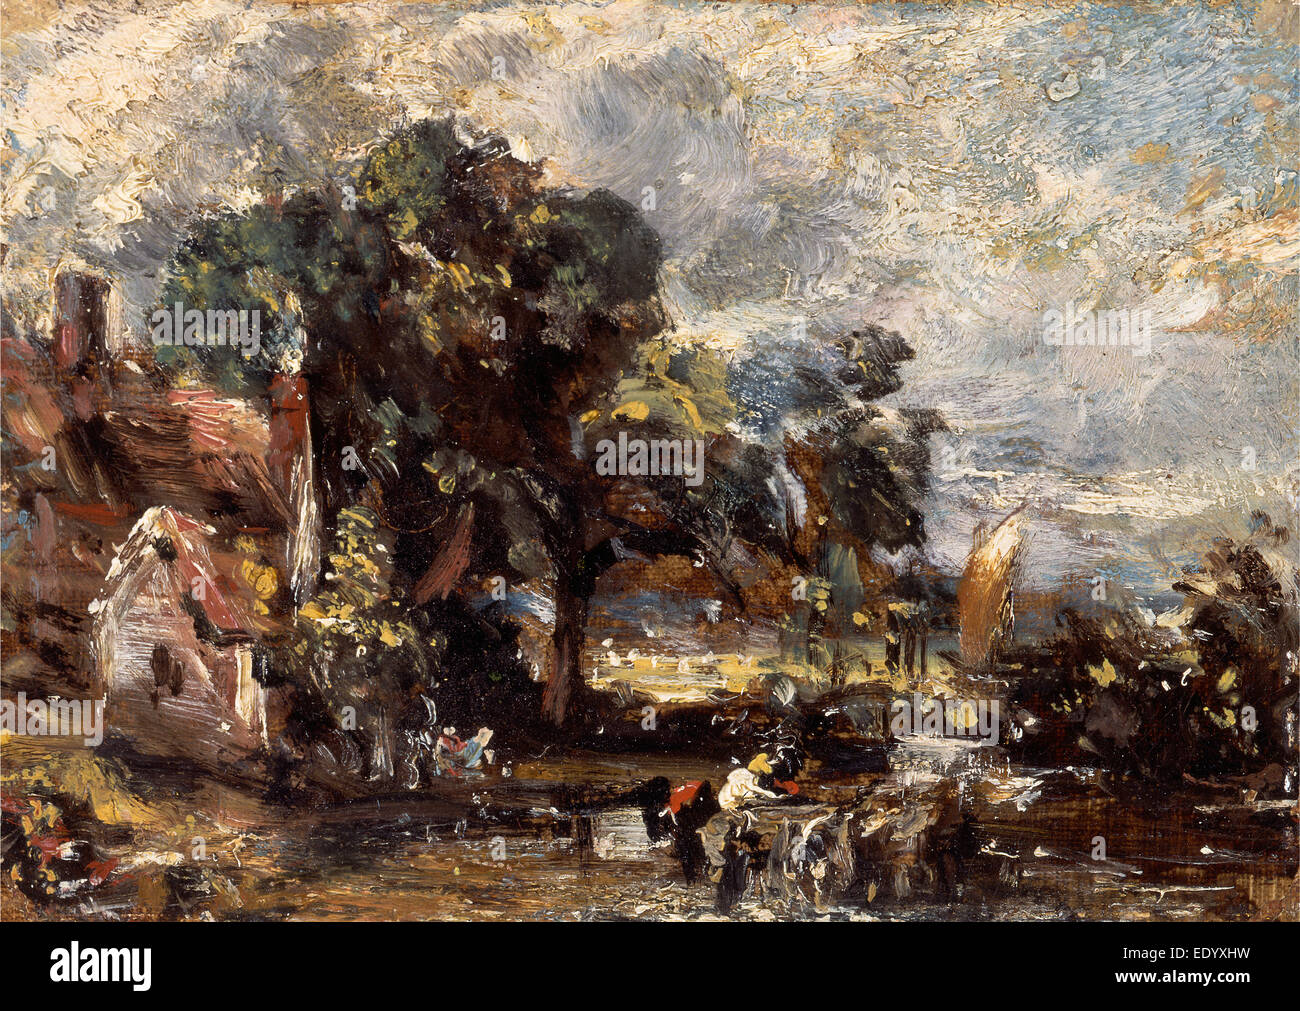 Sketch for 'The Haywain', John Constable, 1776-1837, British Stock Photo